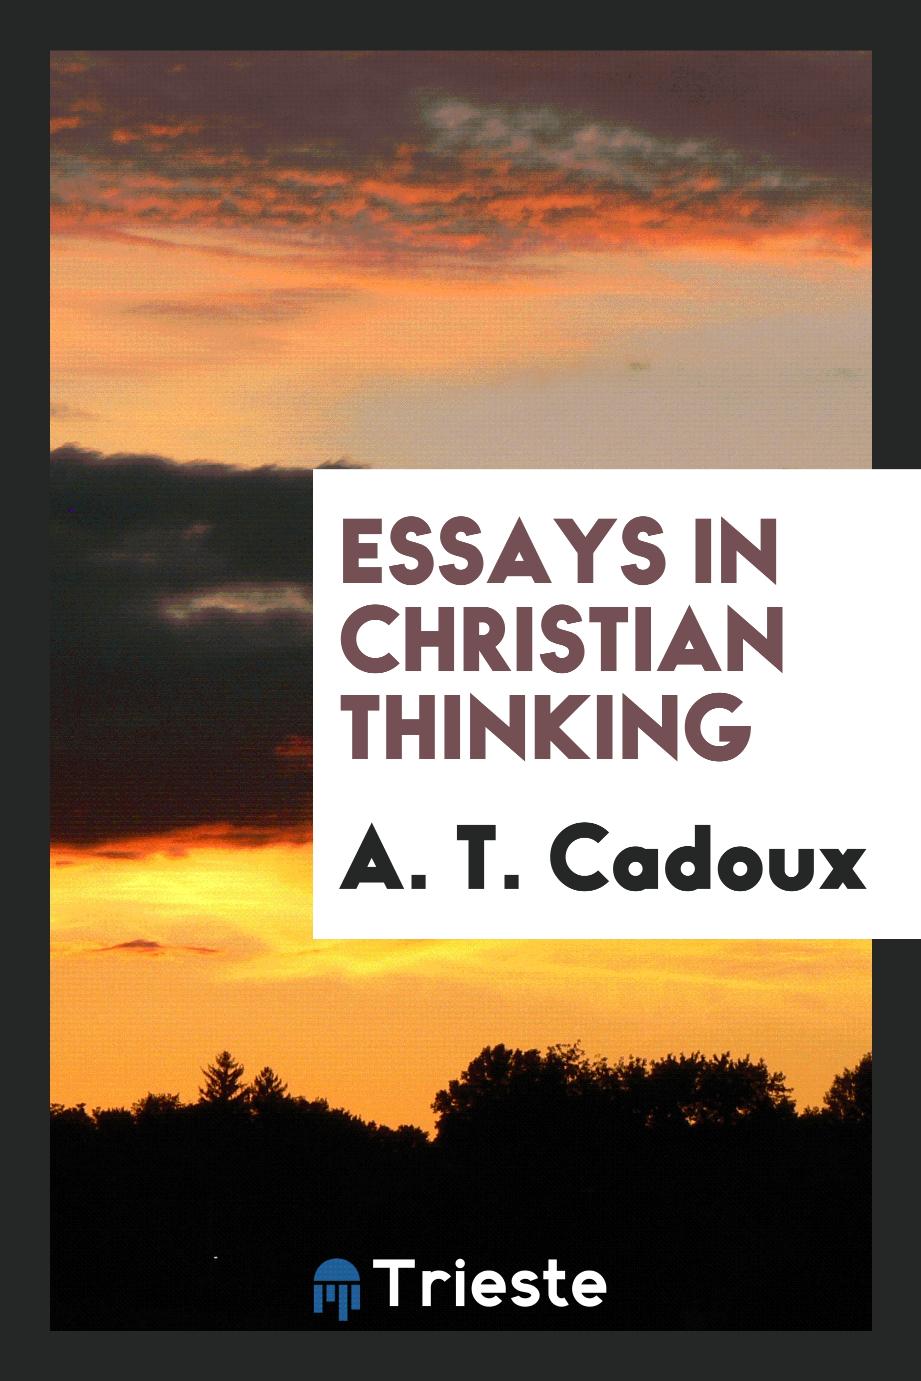 A. T. Cadoux - Essays in Christian thinking